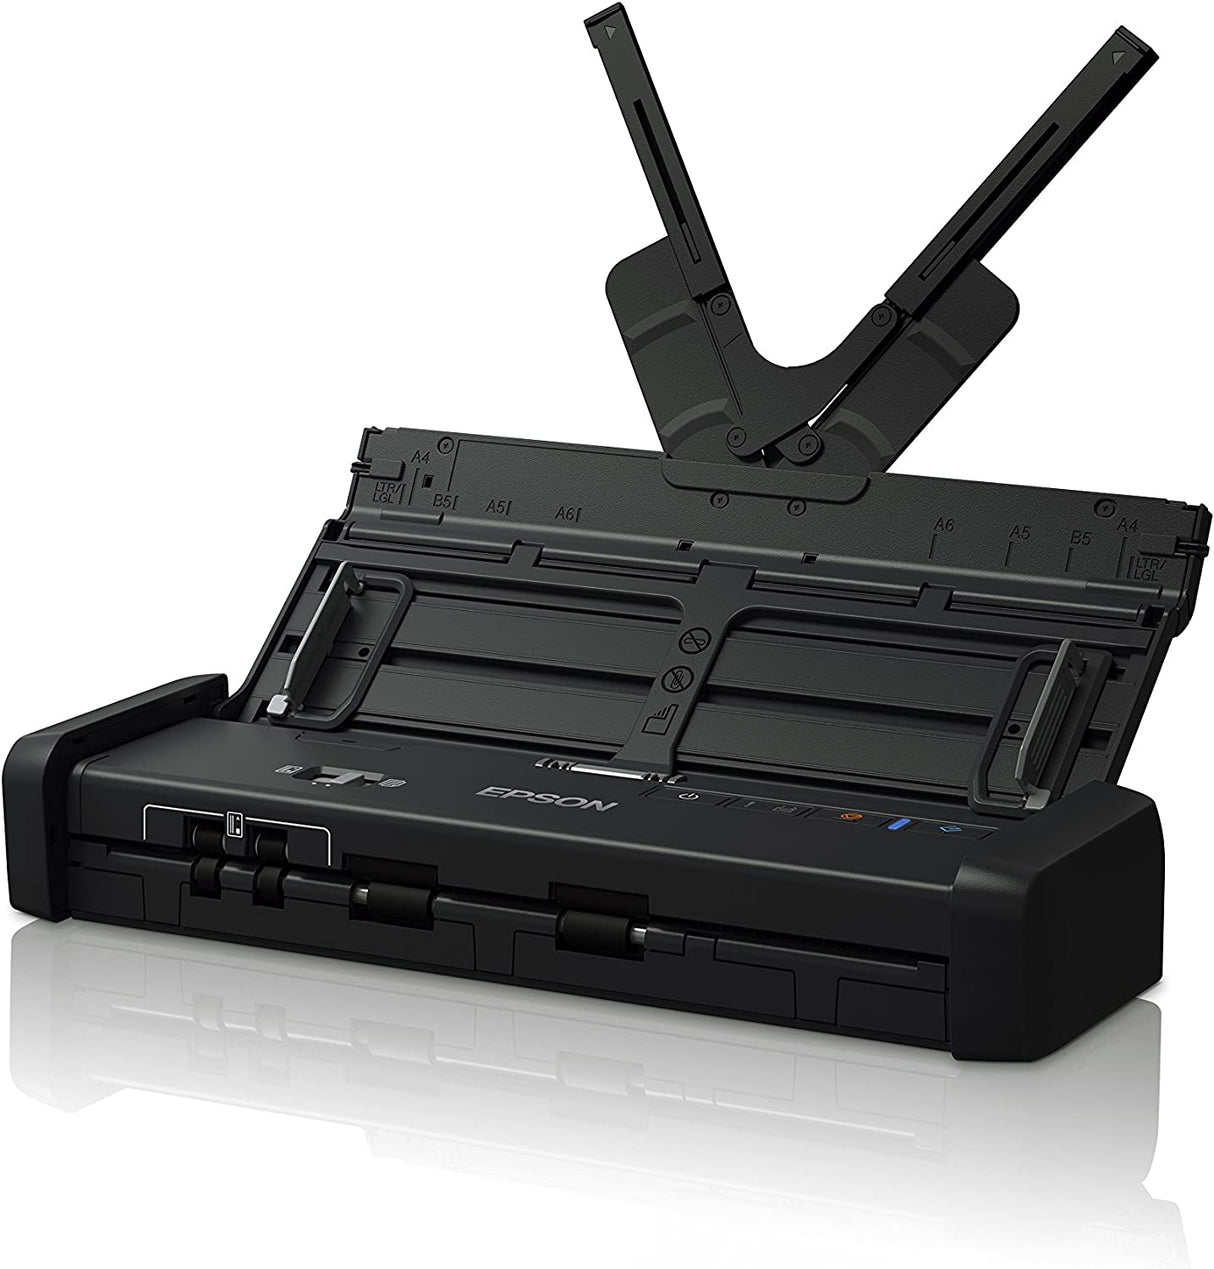 Epson DS-320 Mobile Scanner with ADF: 25ppm, TWAIN &amp; ISIS Drivers, 3-Year Warranty